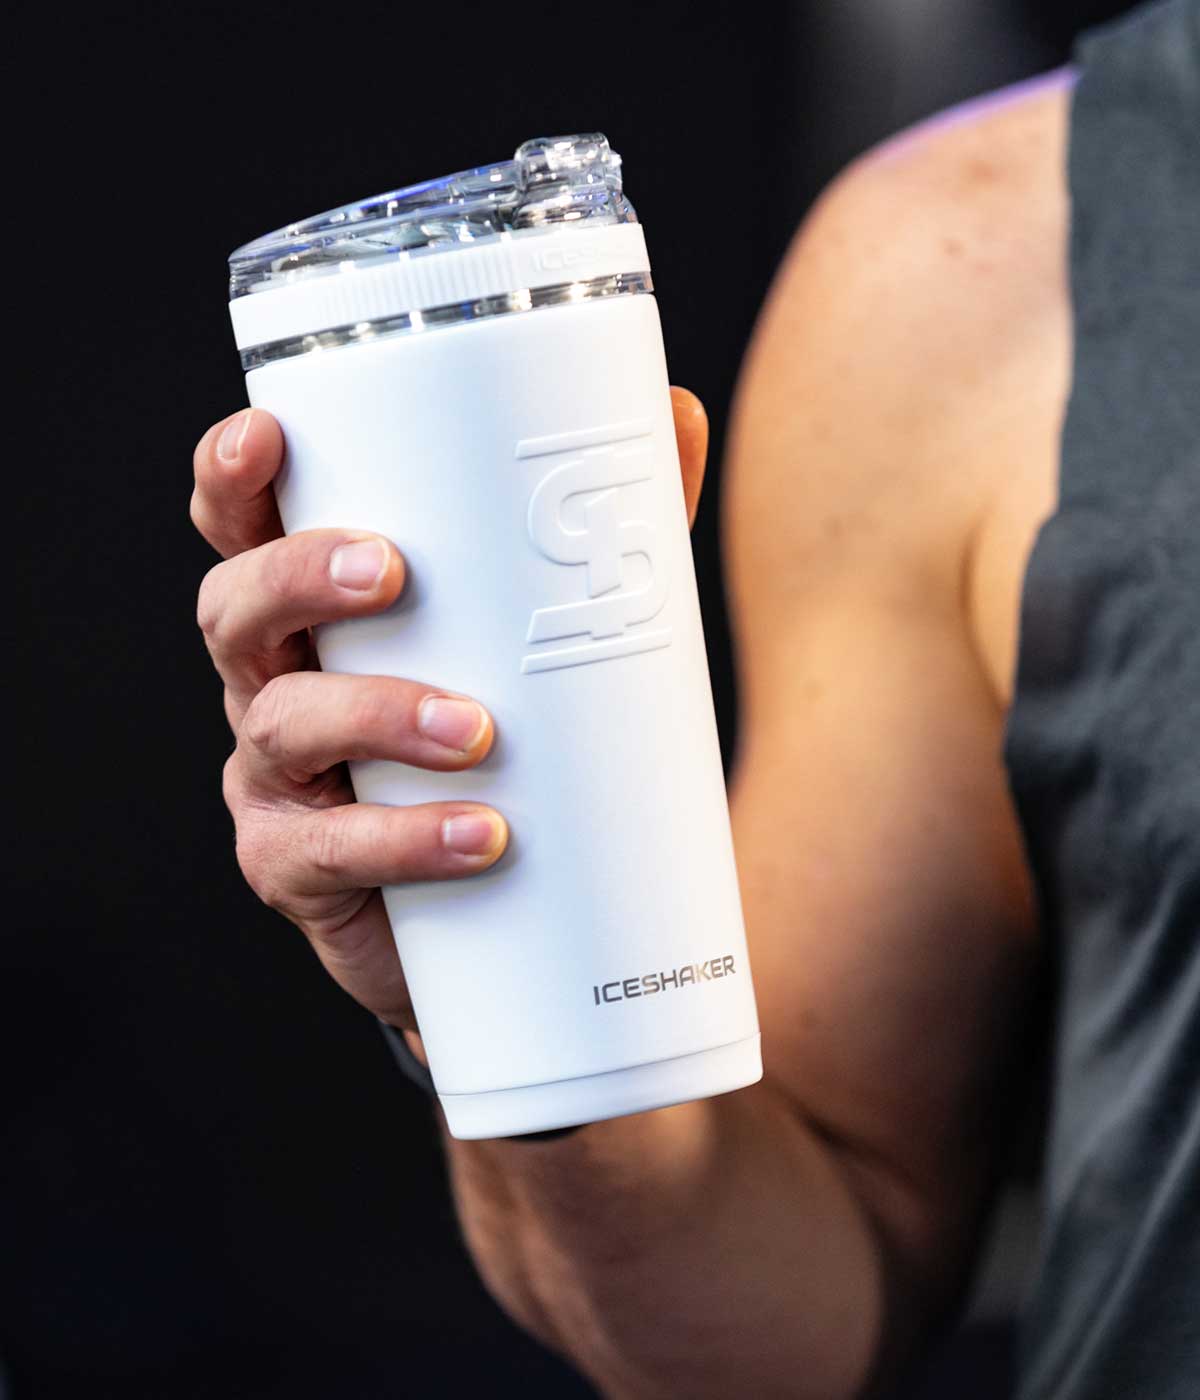 This image shows a close-up image of the White 26oz Flex Bottle being held by a hand. There is a man's muscley arm in the background